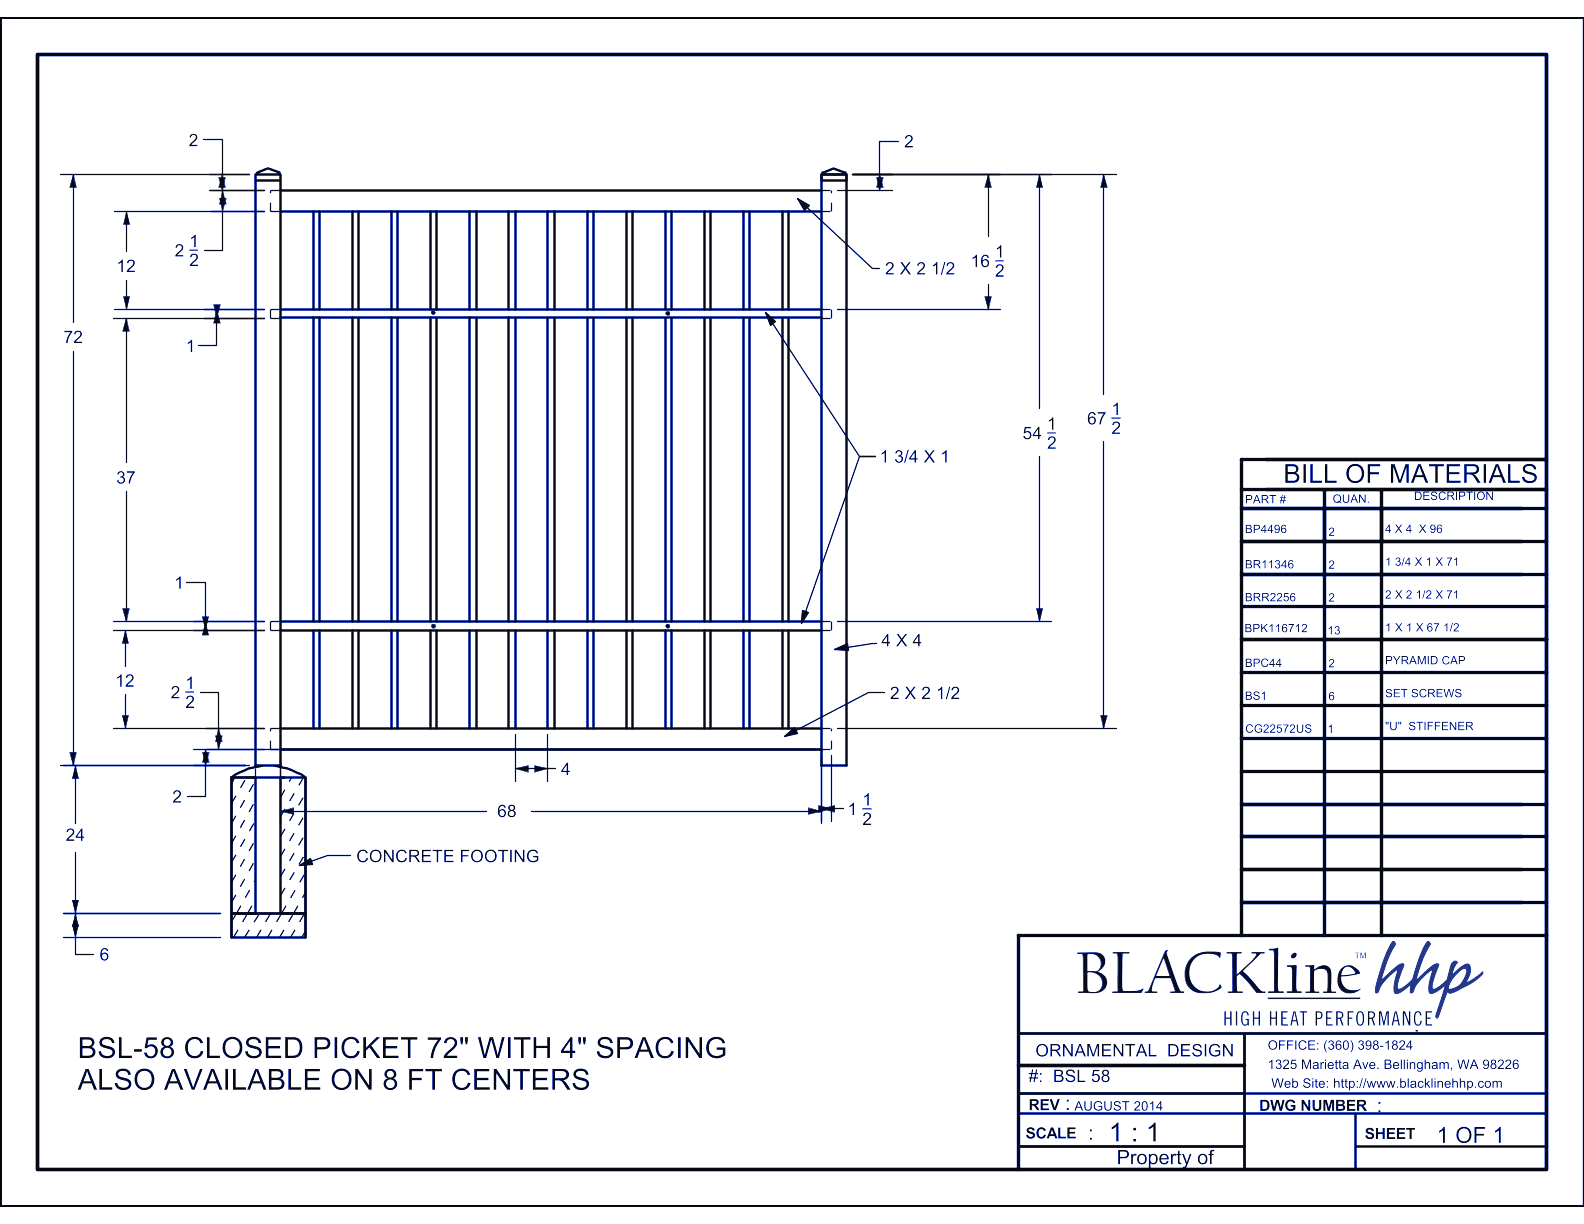 BSL-58: Closed Picket 72" with 4" Spacing - Also Available on 8 Ft. Centers